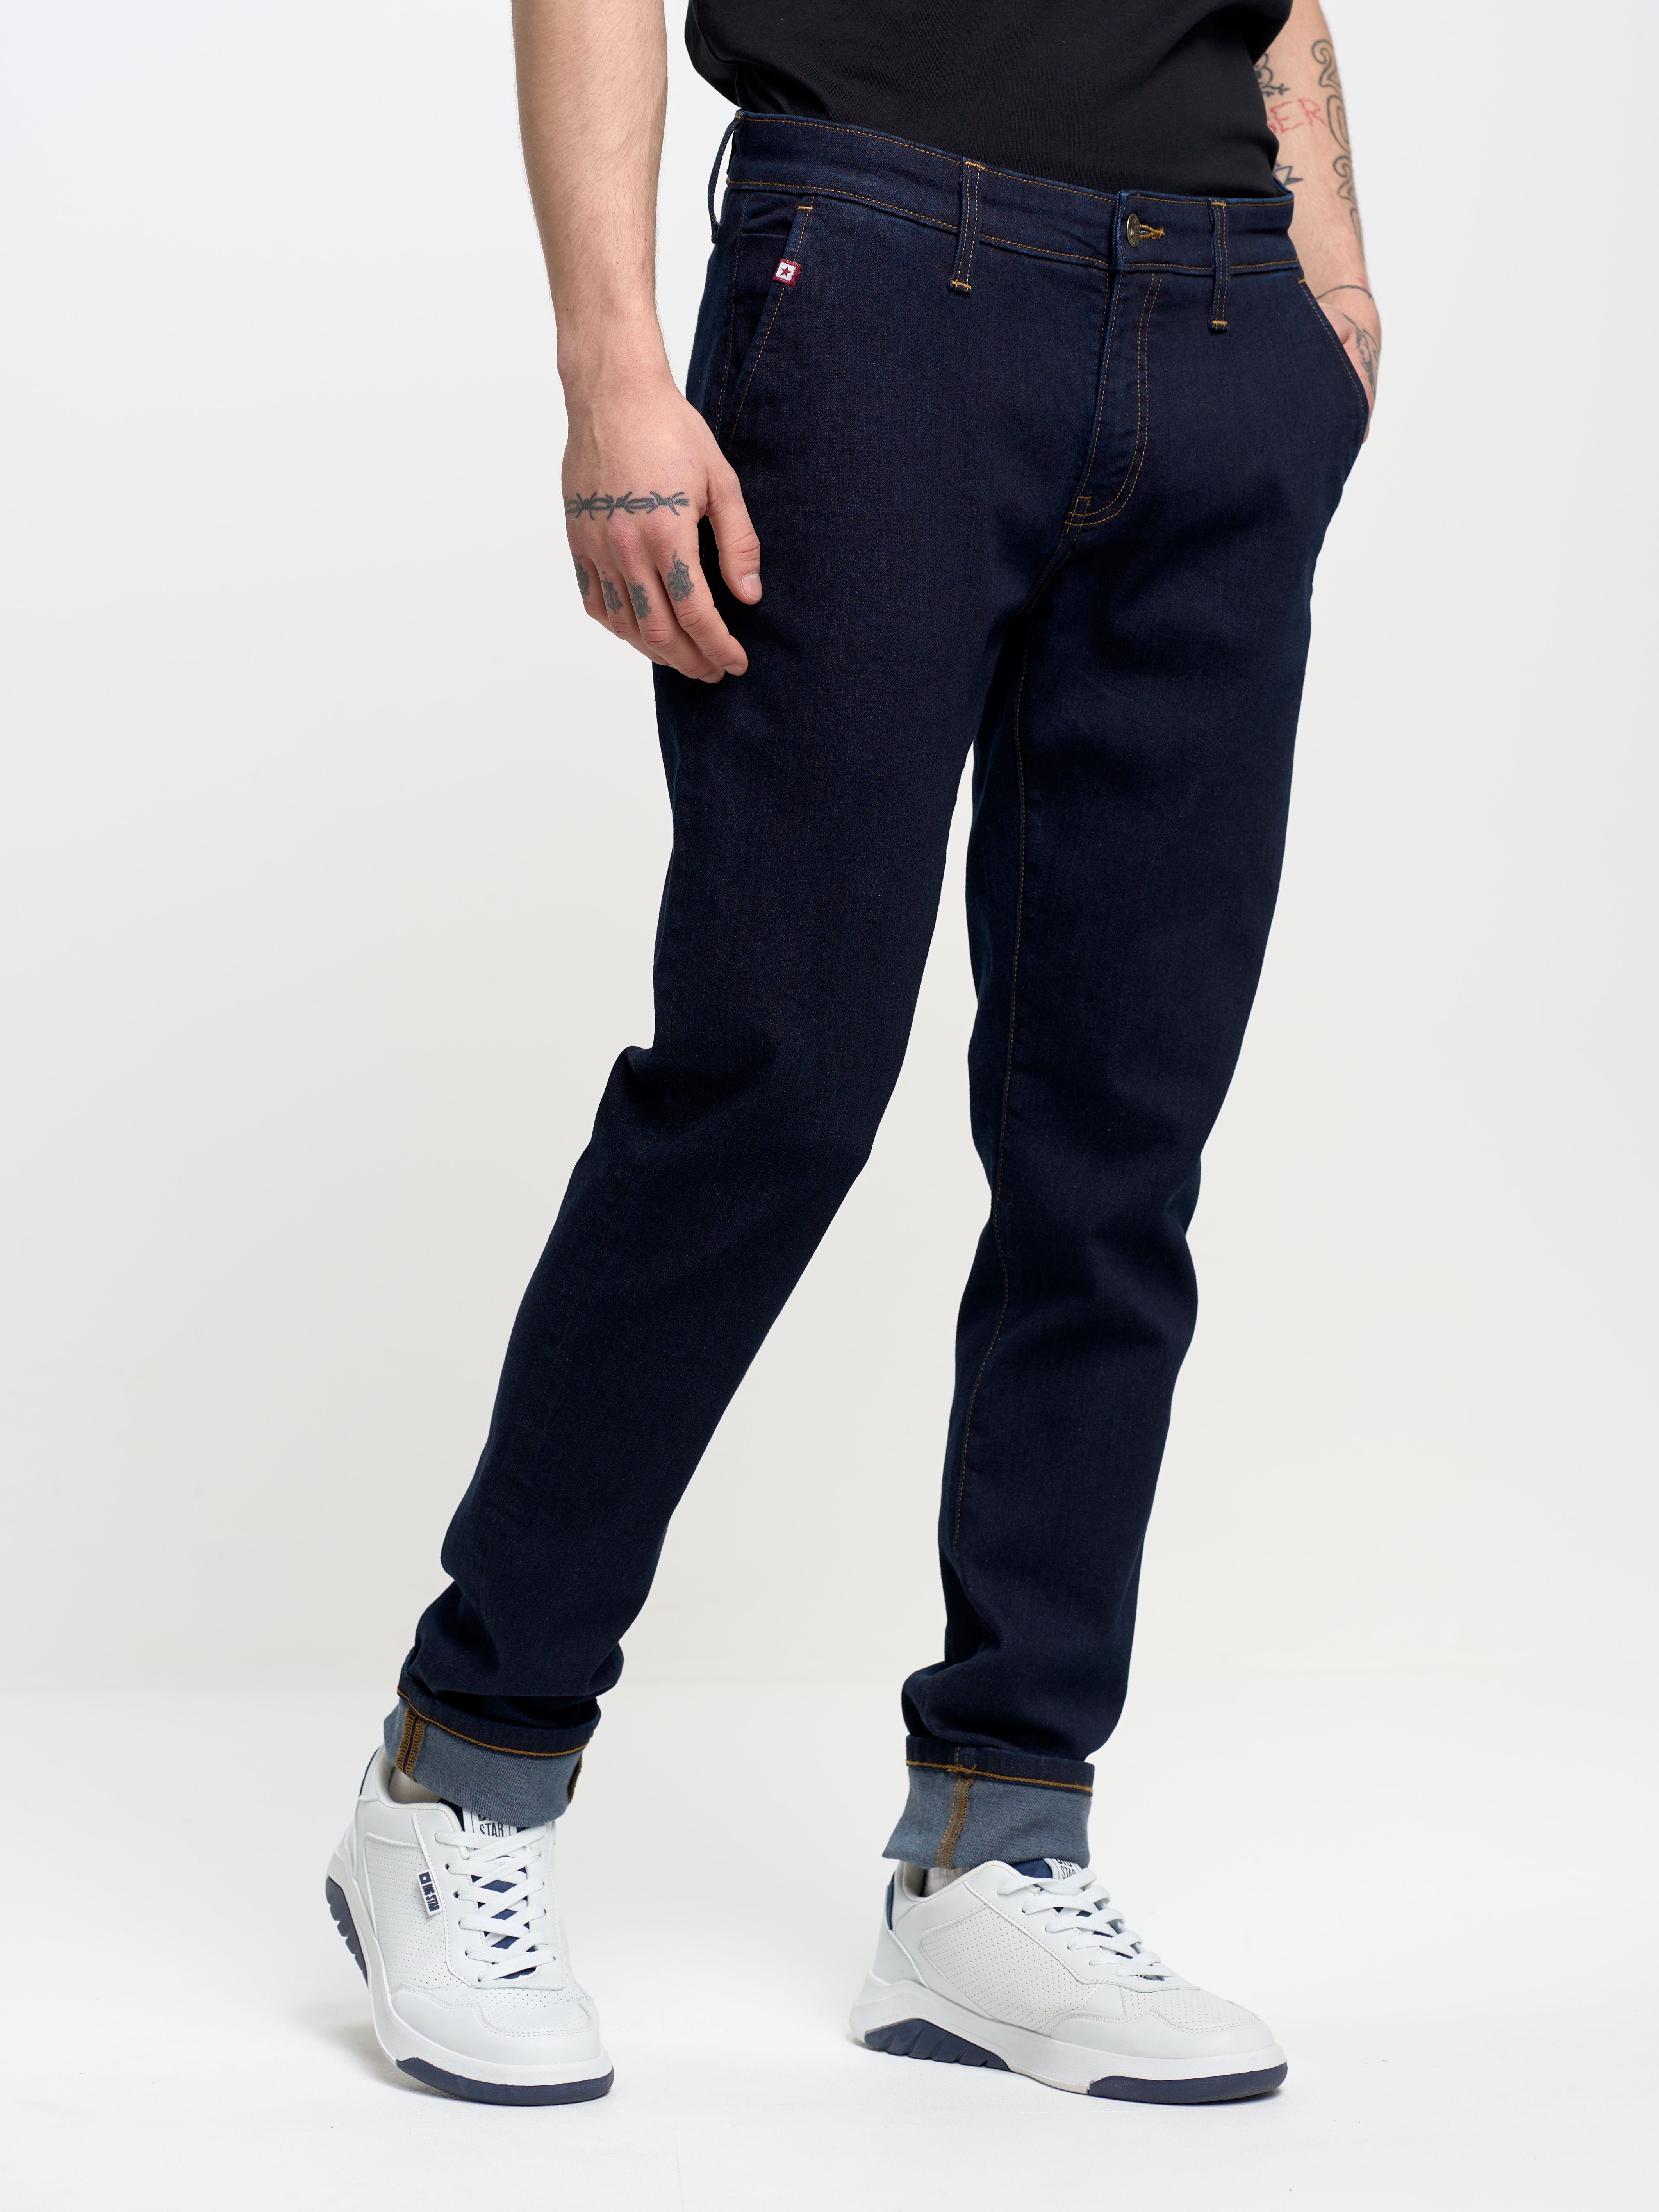 Big Star Man's Chinos Trousers 190027 -784